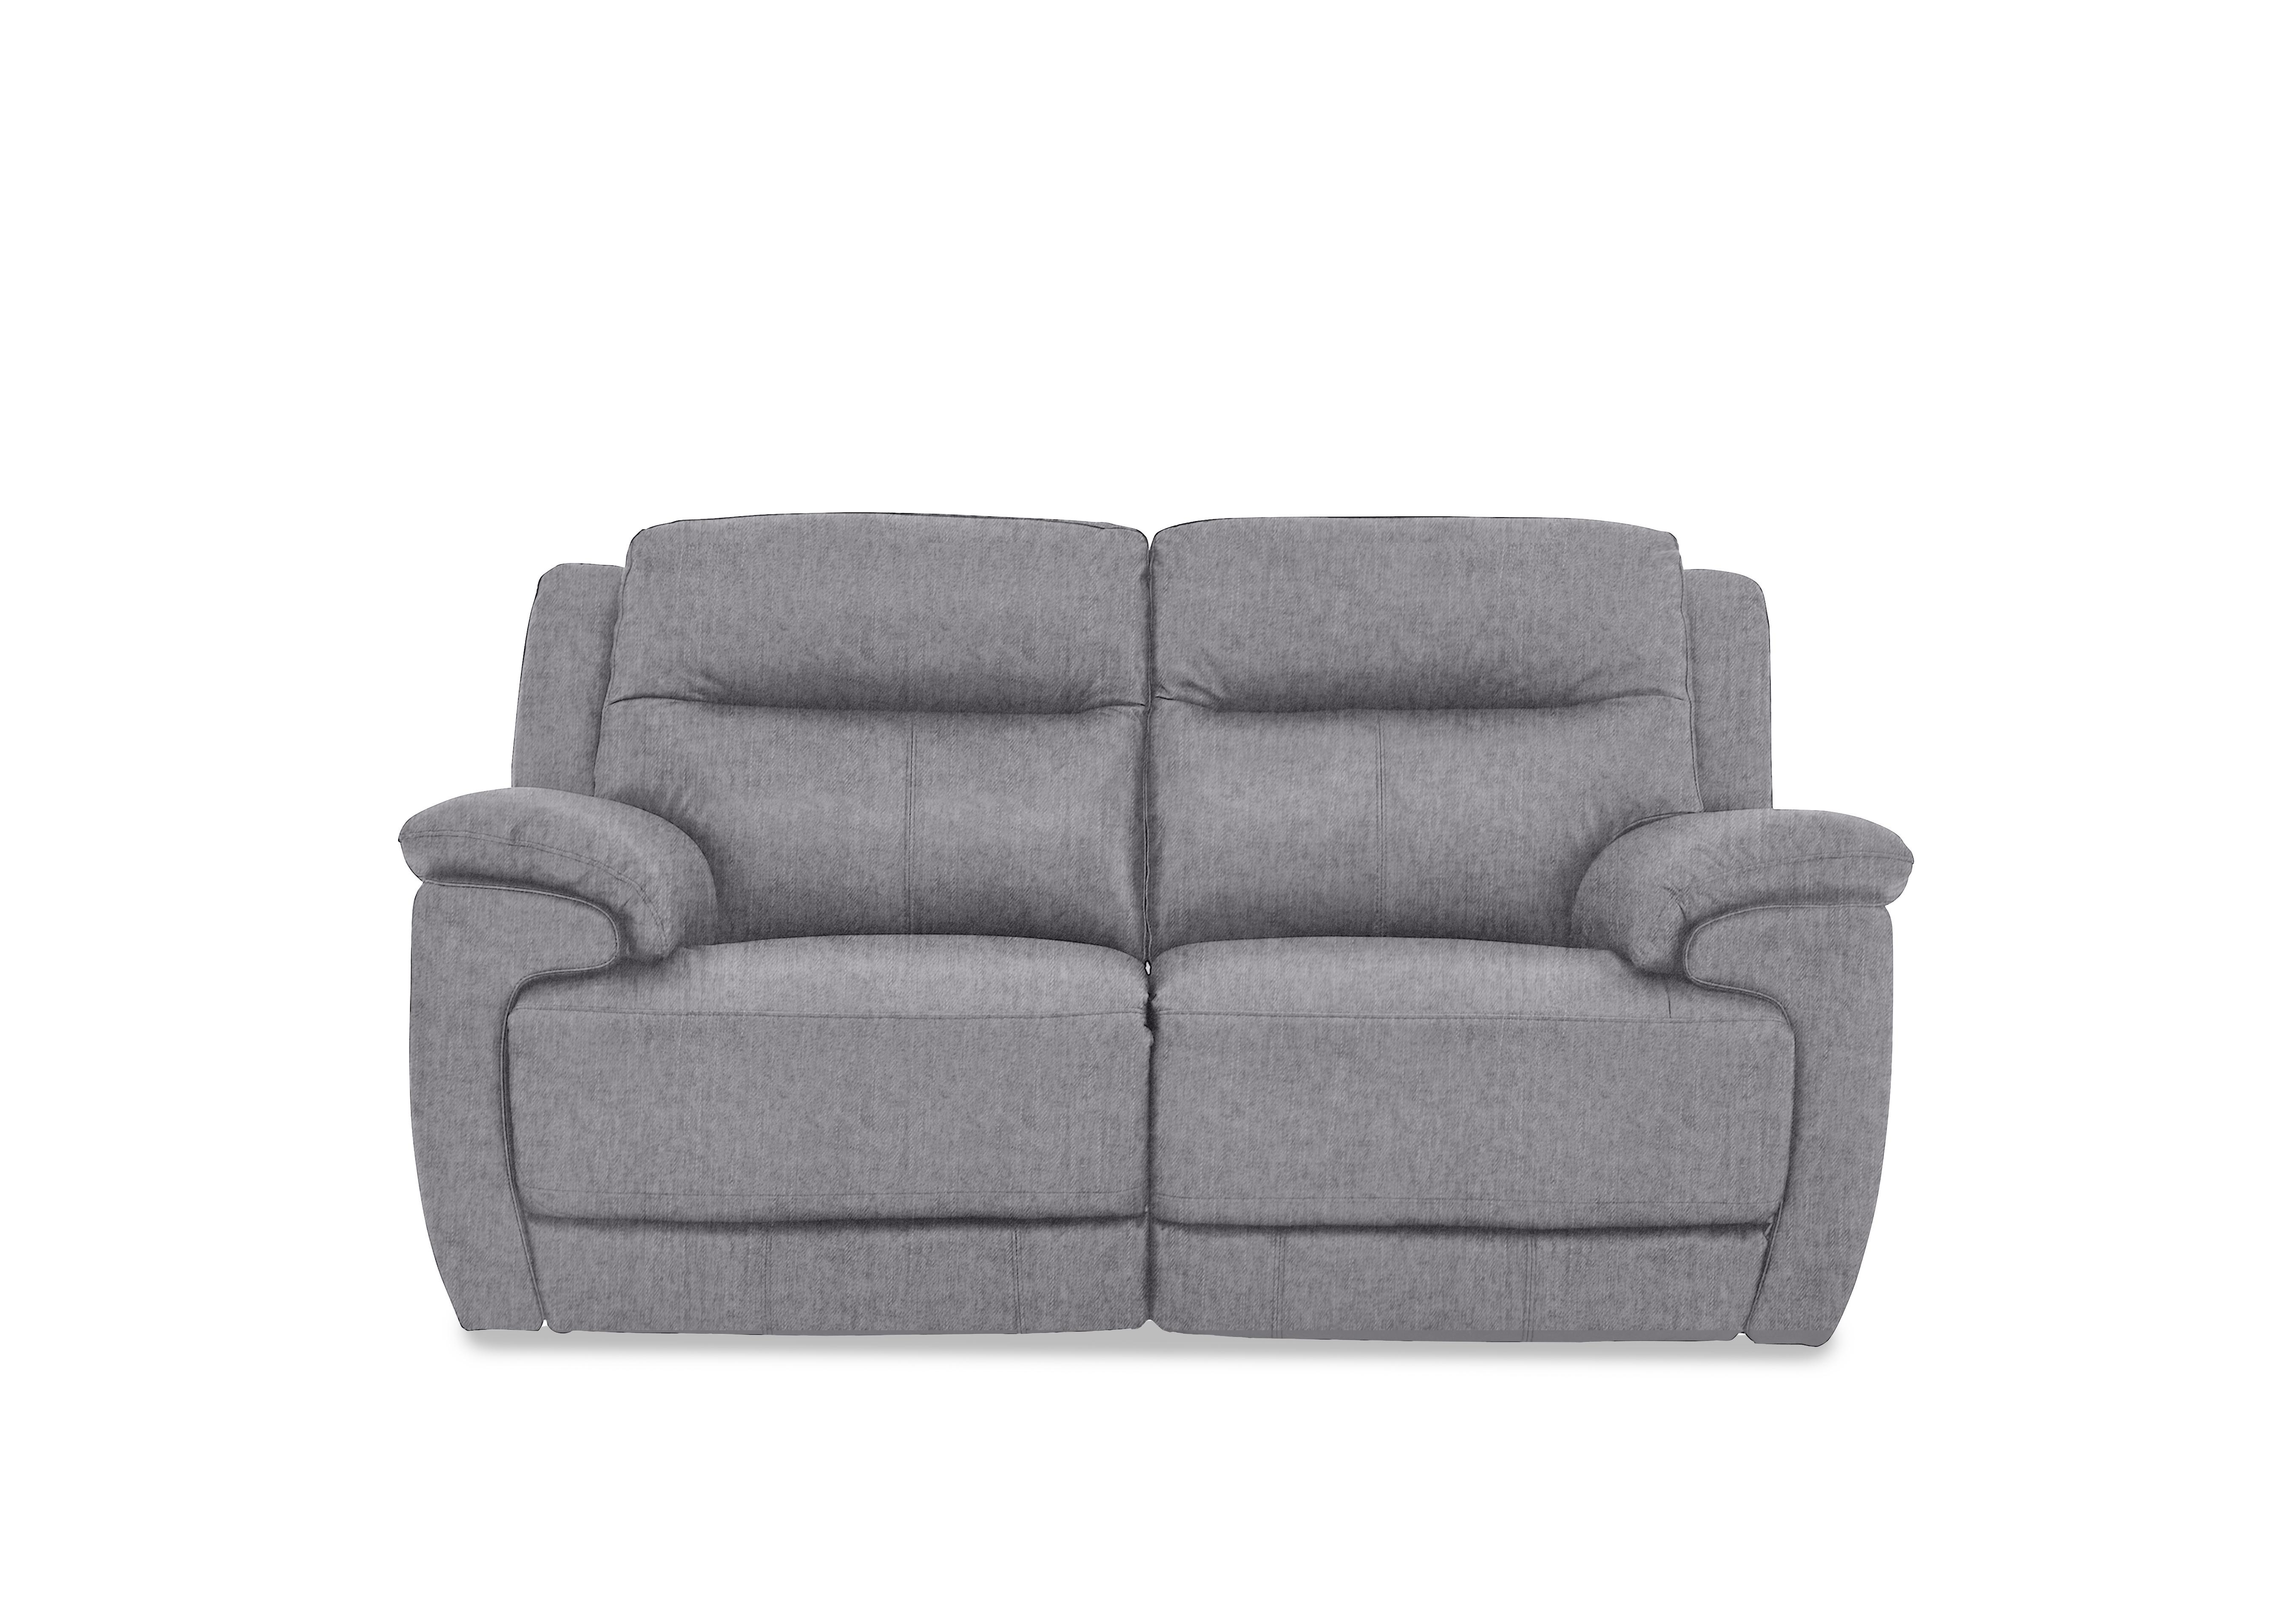 Touch 2 Seater Heavy Duty Fabric Sofa in Fab-Meo-R27 Pewter on Furniture Village